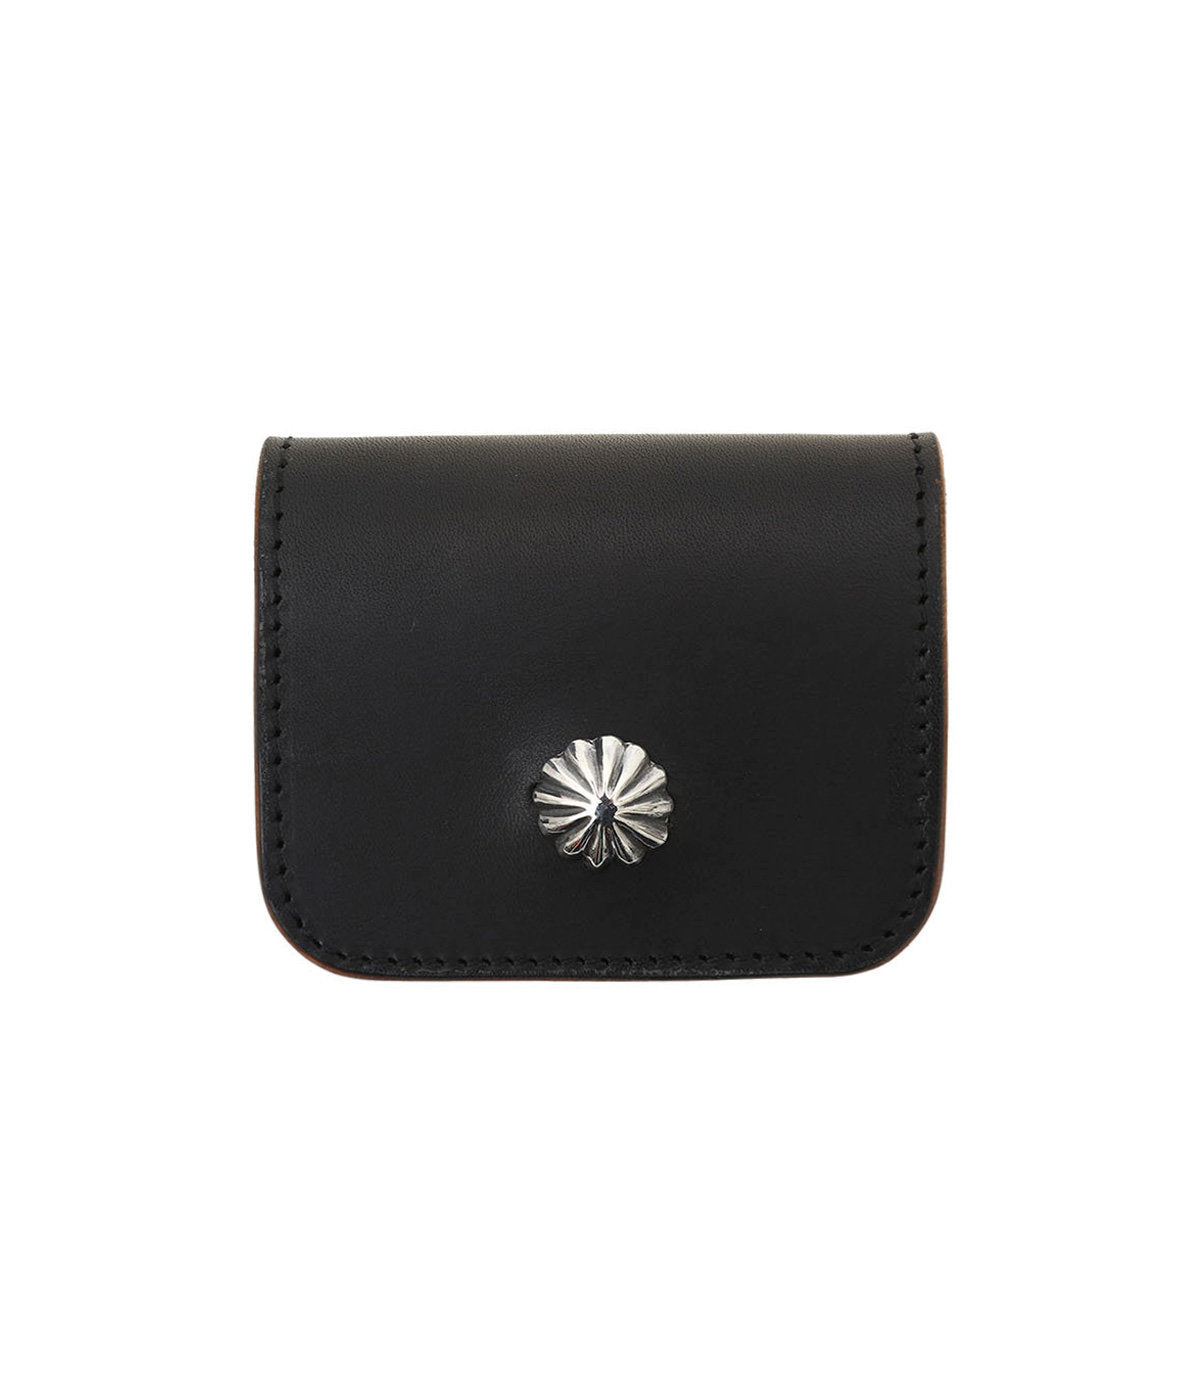 LARRY SMITH COIN CASE No.1 (SHELL)